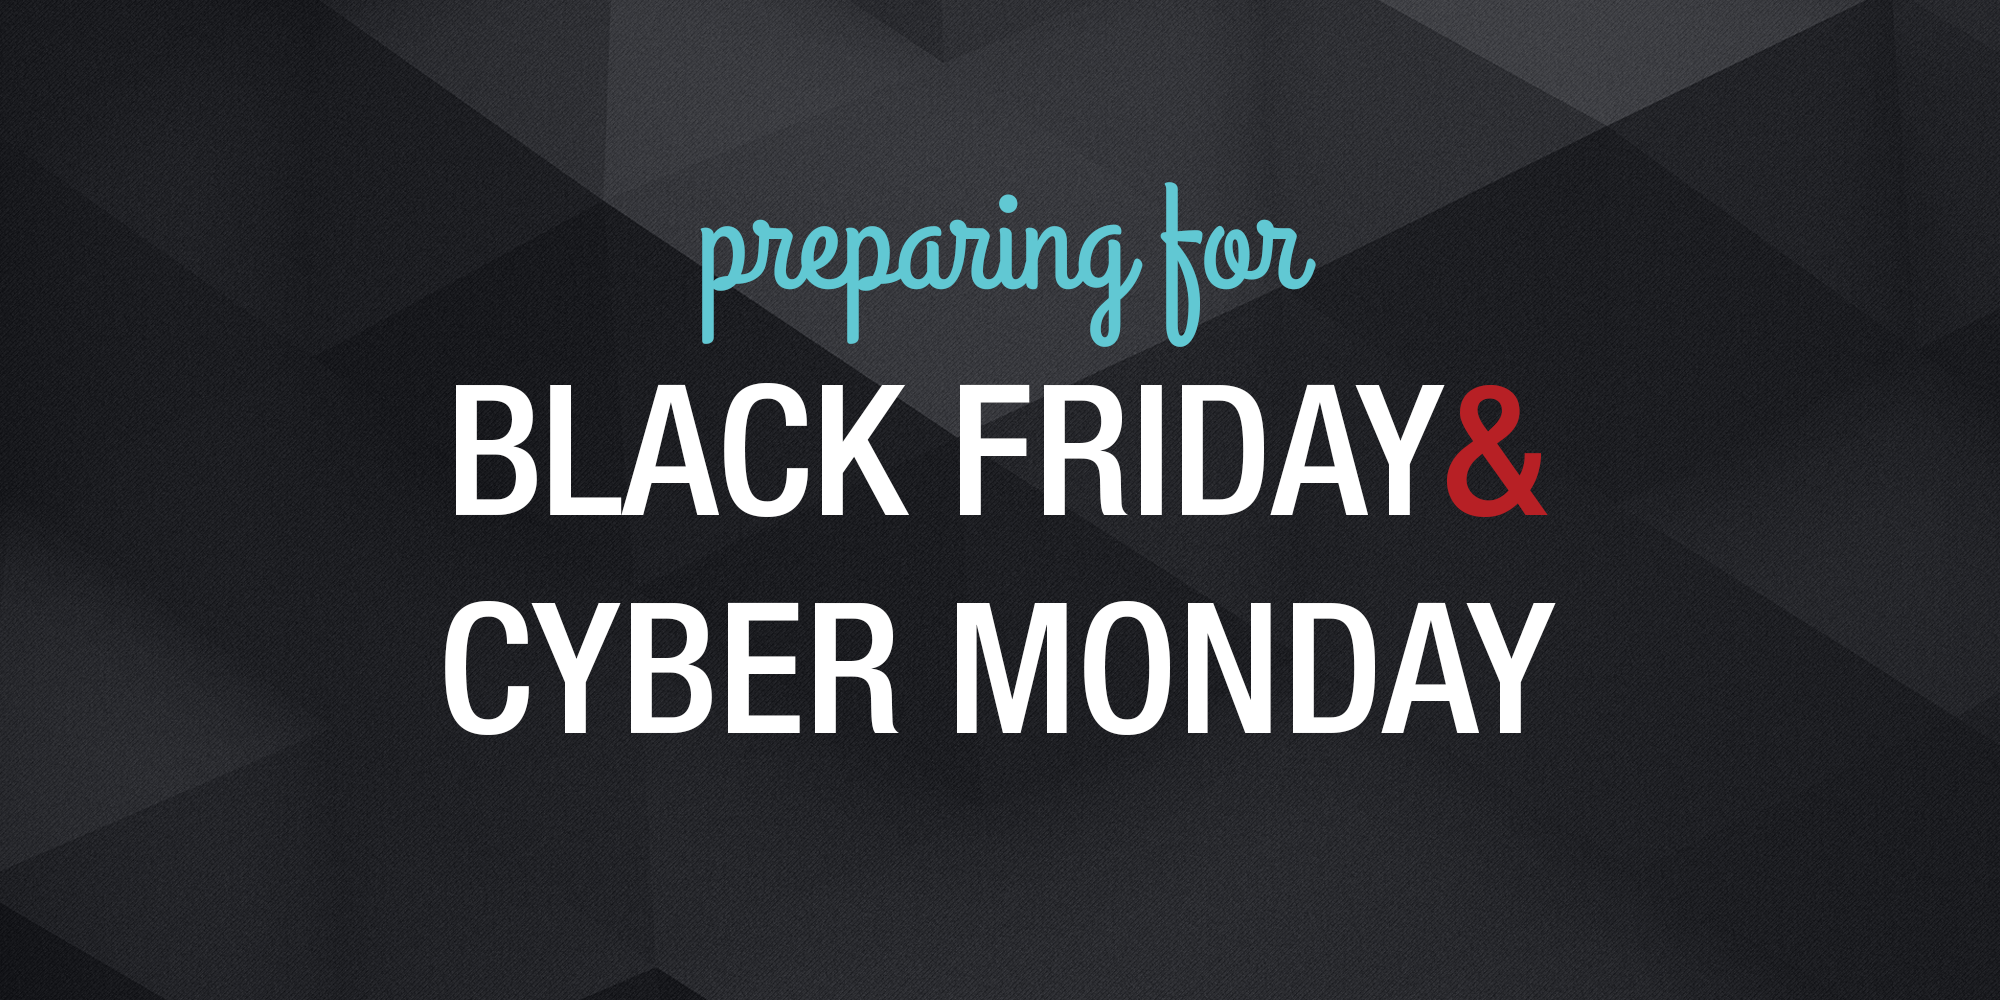 Preparing For Black Friday and Cyber Monday